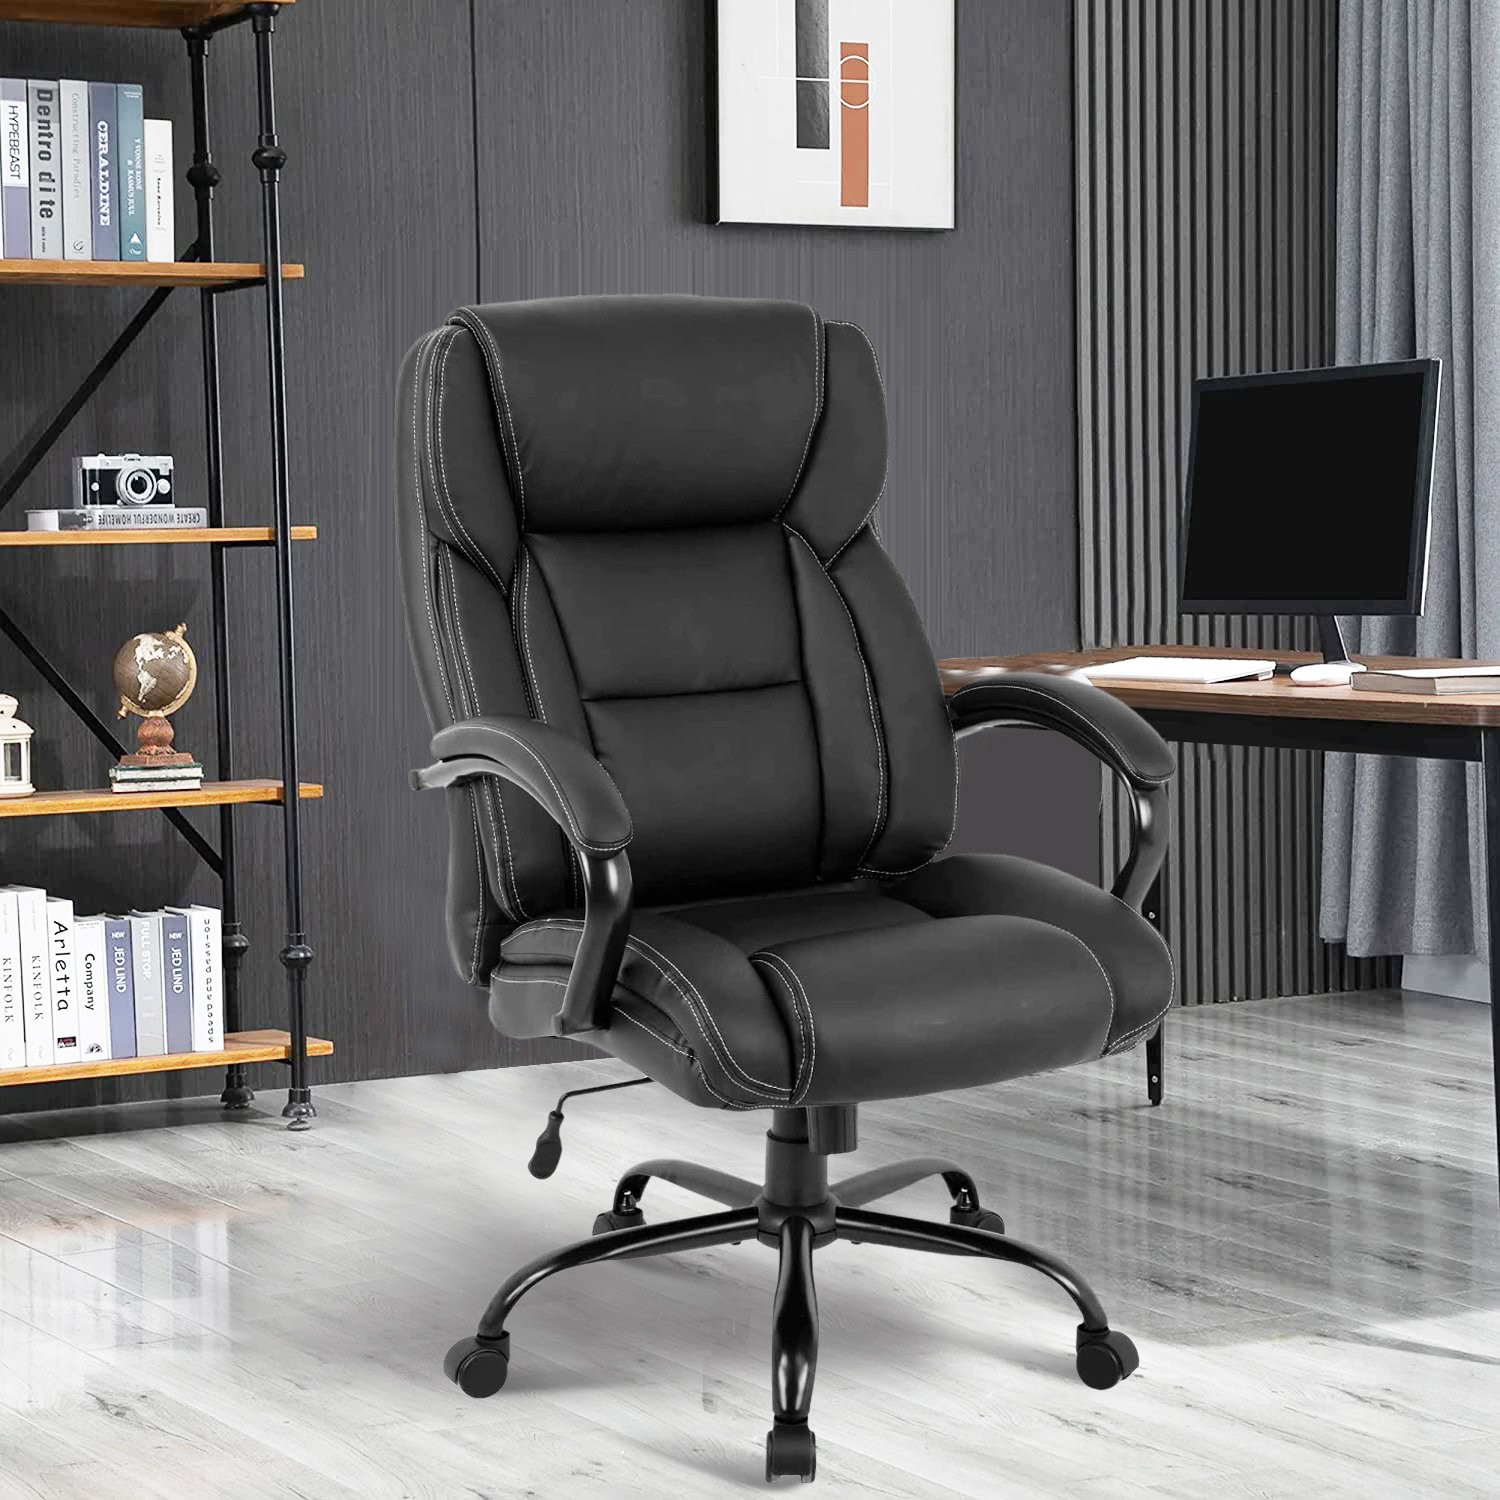 YAMASORO Ergonomic Executive Office Chair High Back Leather Computer Chair,Office  Desk Chair with arms and Wheels, Swivel for Women, Men